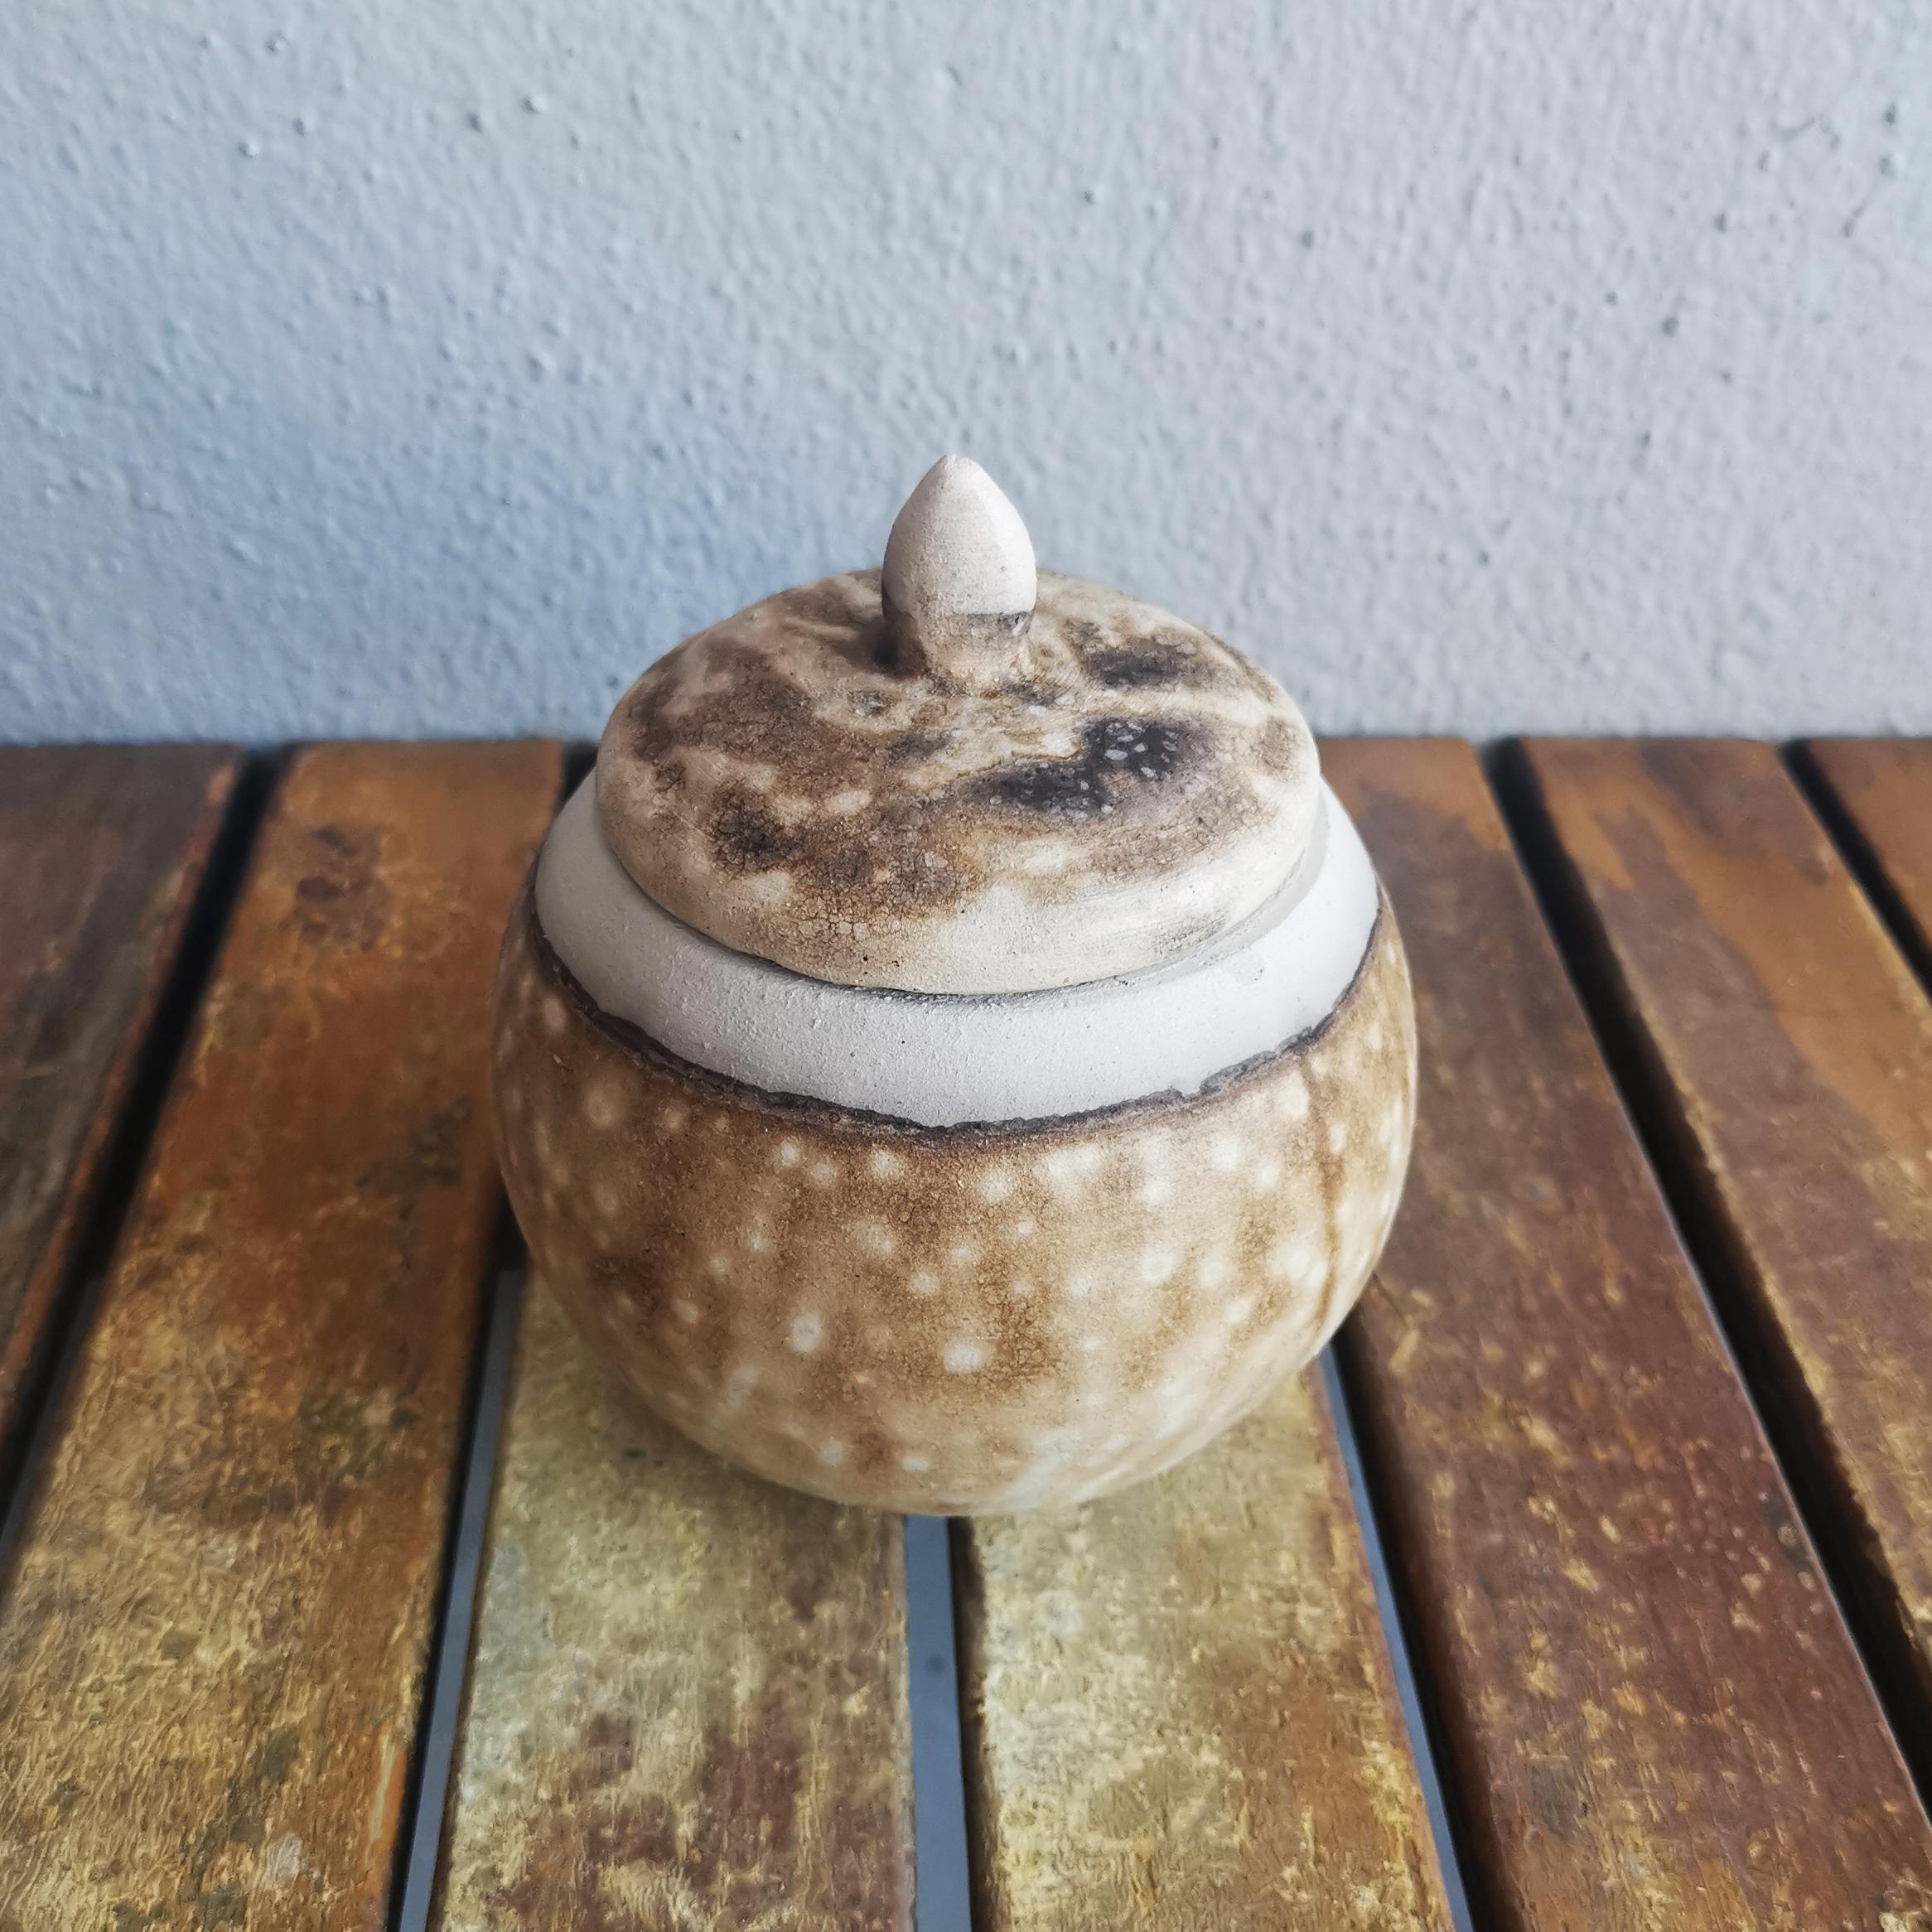 Kioku - Remembrance

The Kioku urn is a small palm sized urn that is formed with an organic spherical shape. This urn is very suitable for the remains of pets, or for shared remembrance among family members.

Height: 3.3 in (8.5Cm)
Width: 4 in